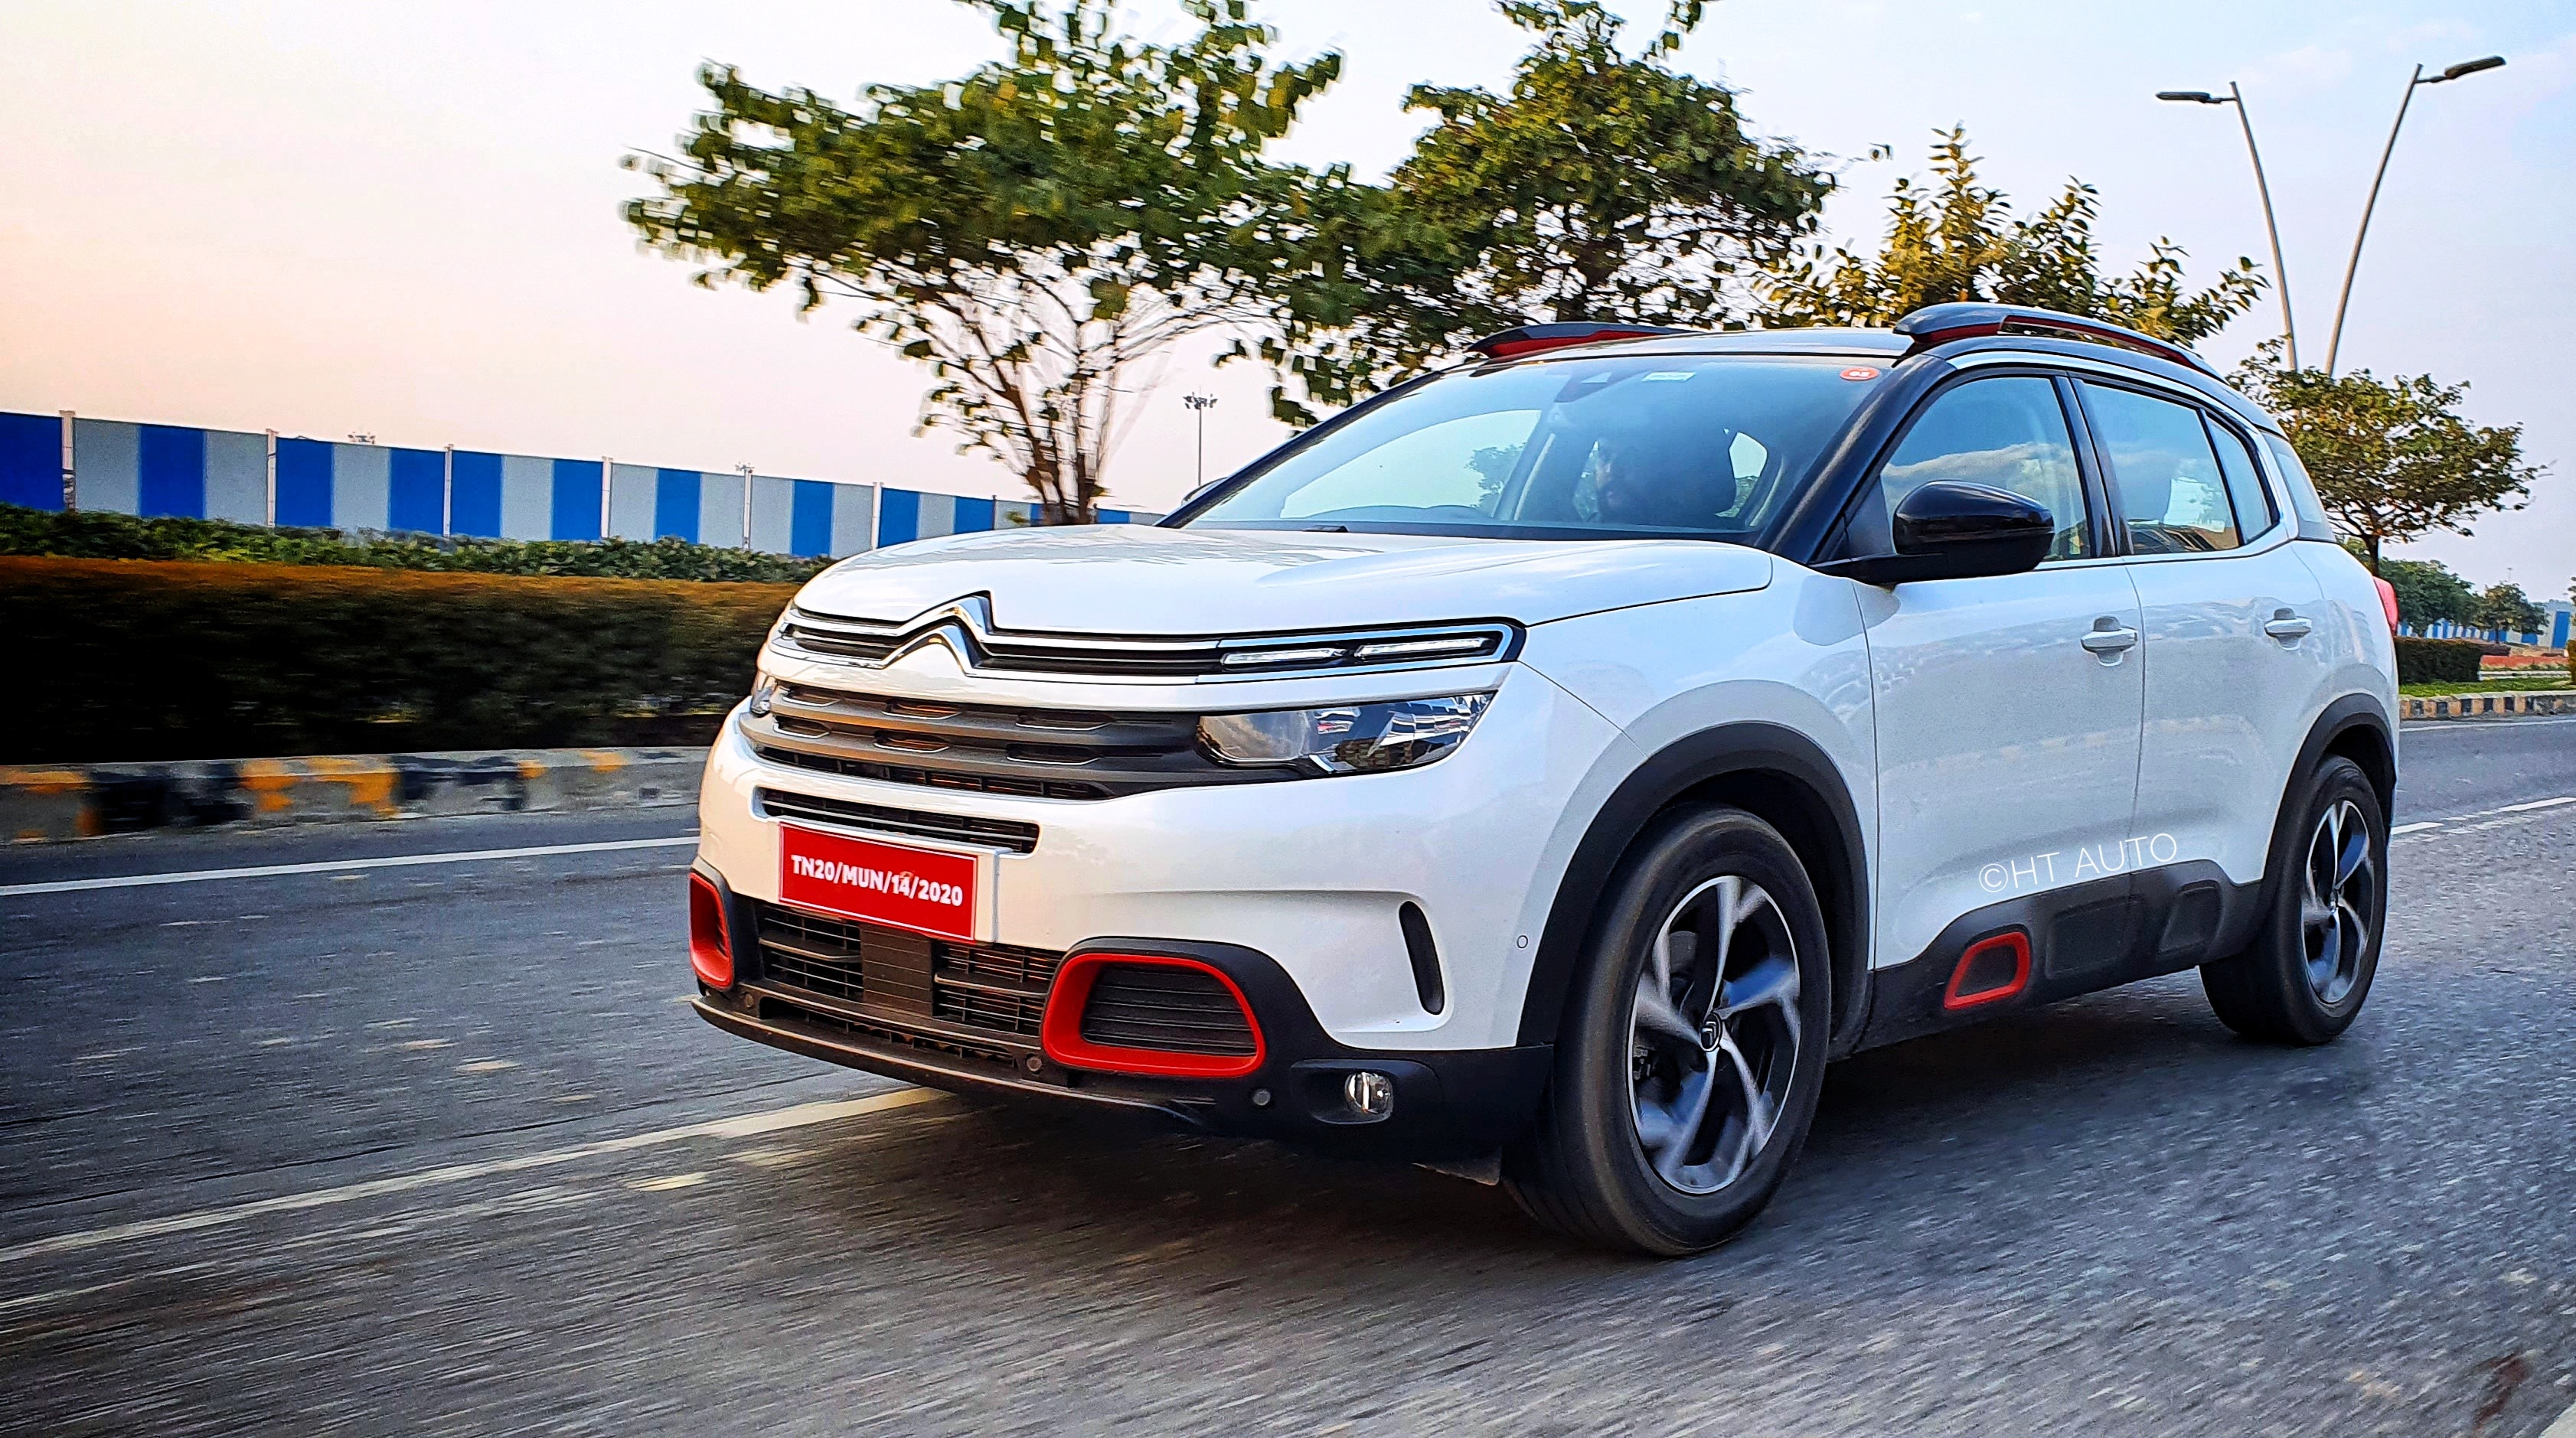 The C5 Aircross is well planted on tarmac and the tyres hug the surface well to provide a reassuring drive. (HT Auto/Sabyasachi Dasgupta)